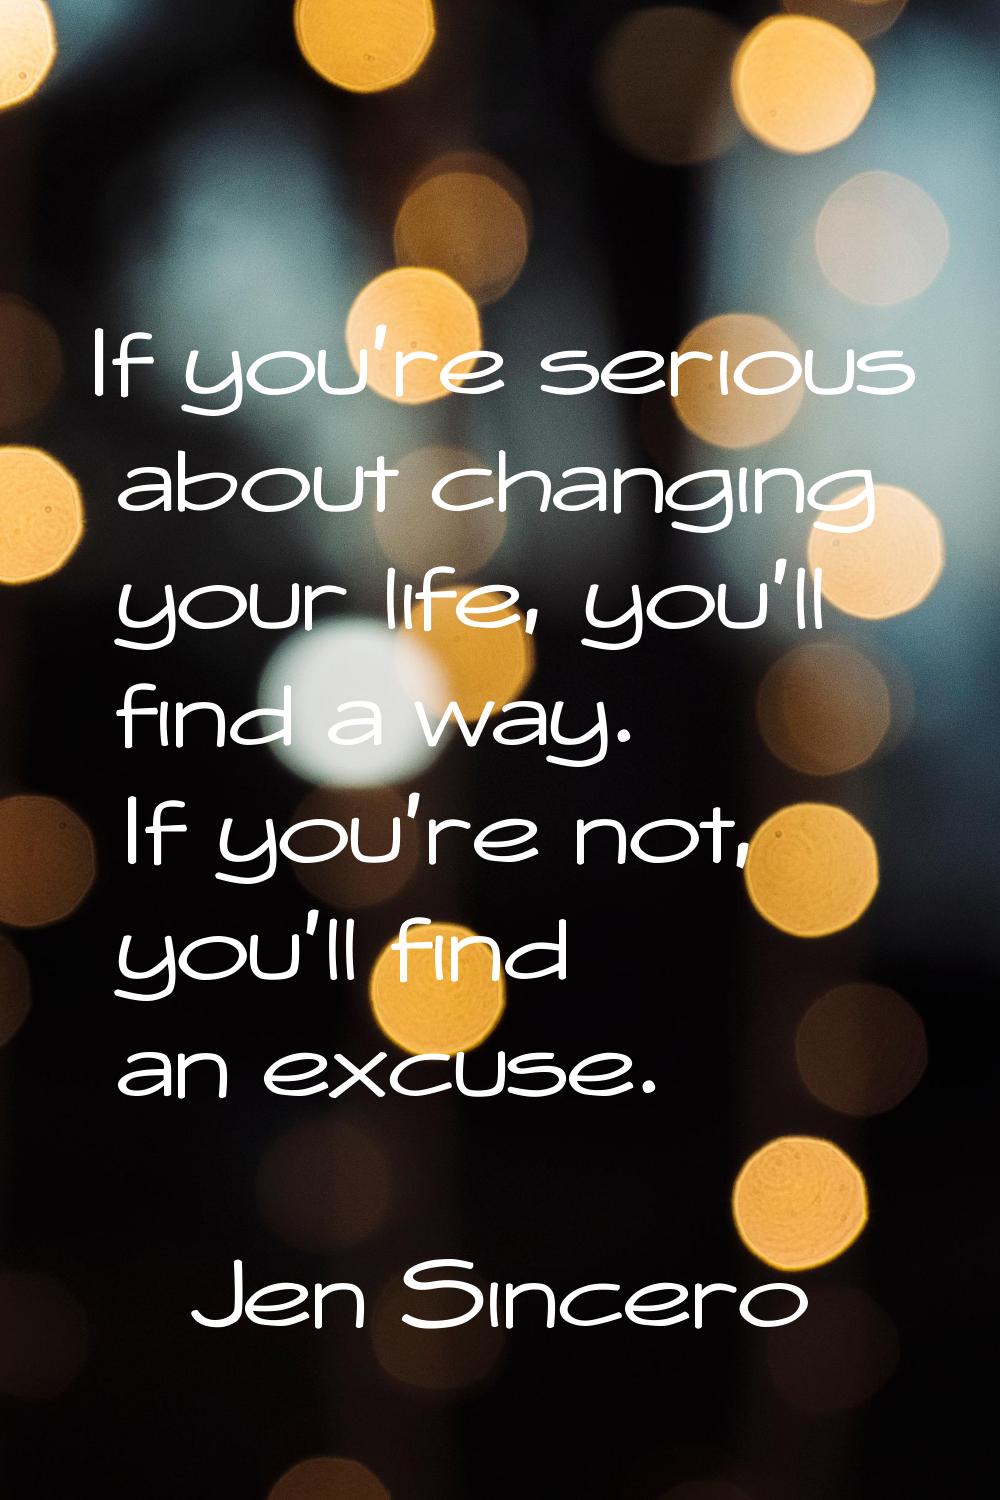 If you're serious about changing your life, you'll find a way. If you're not, you'll find an excuse